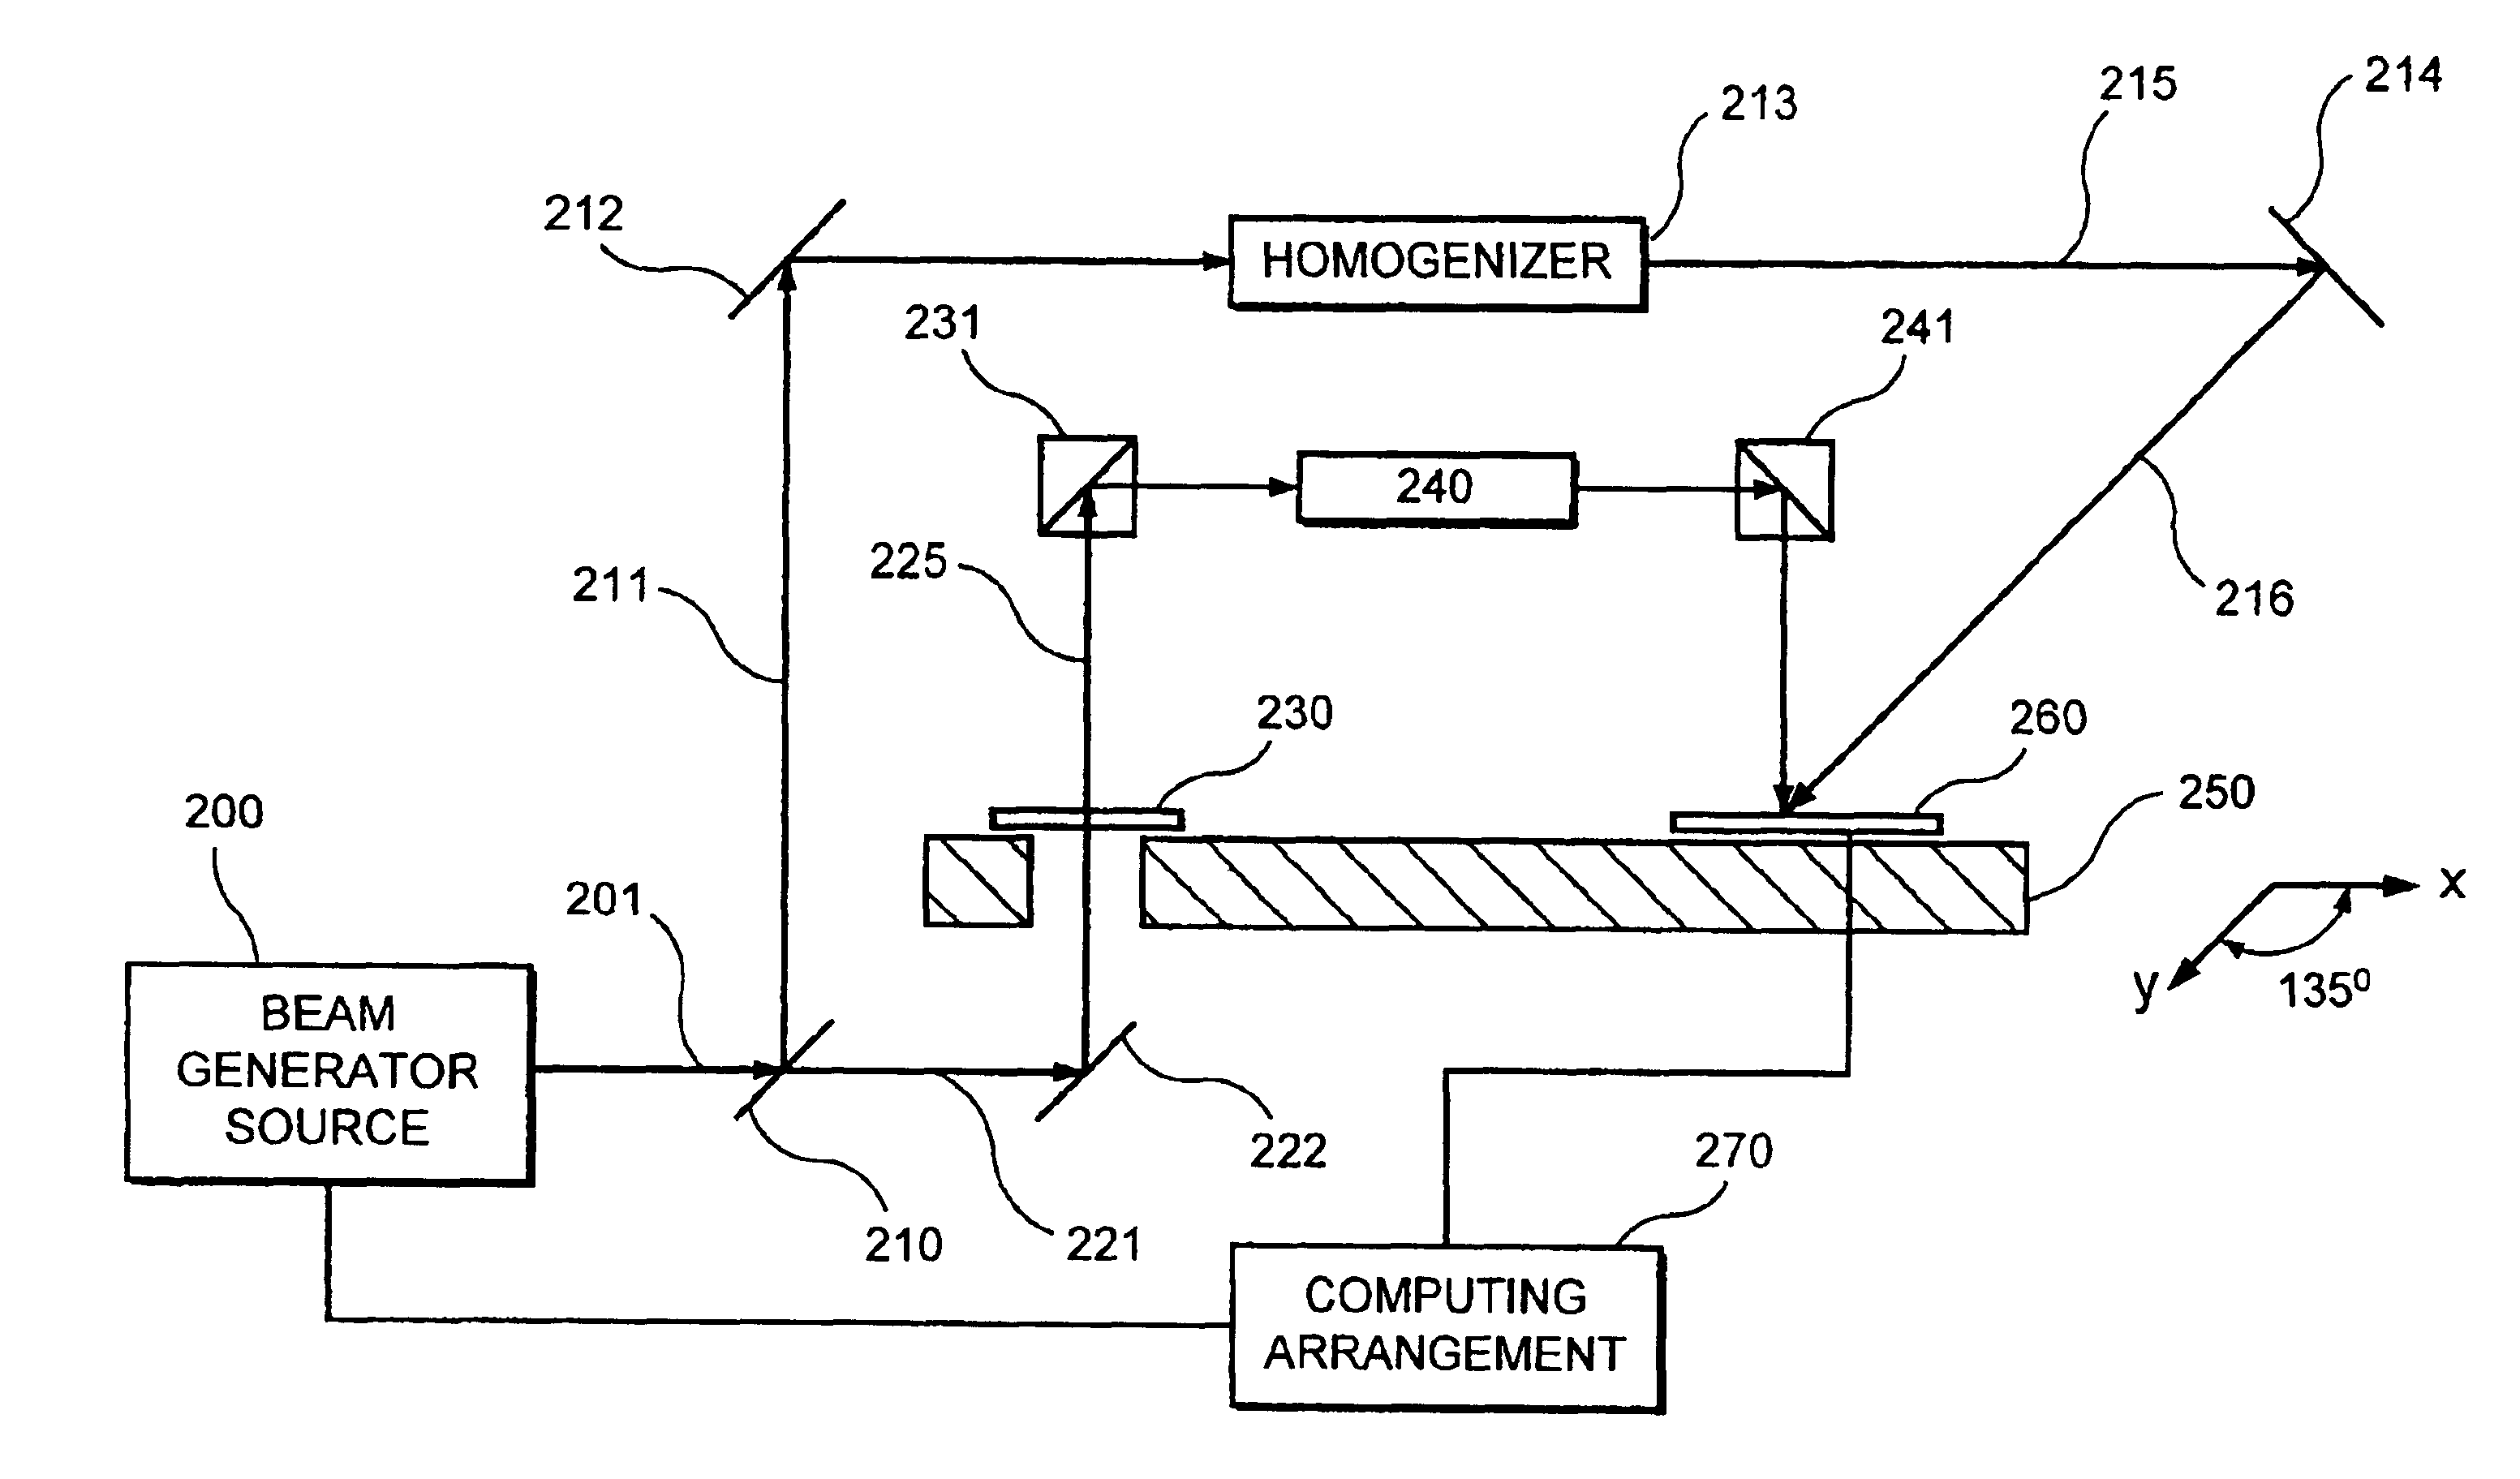 Process and mask projection system for laser crystallization processing of semiconductor film regions on a substrate